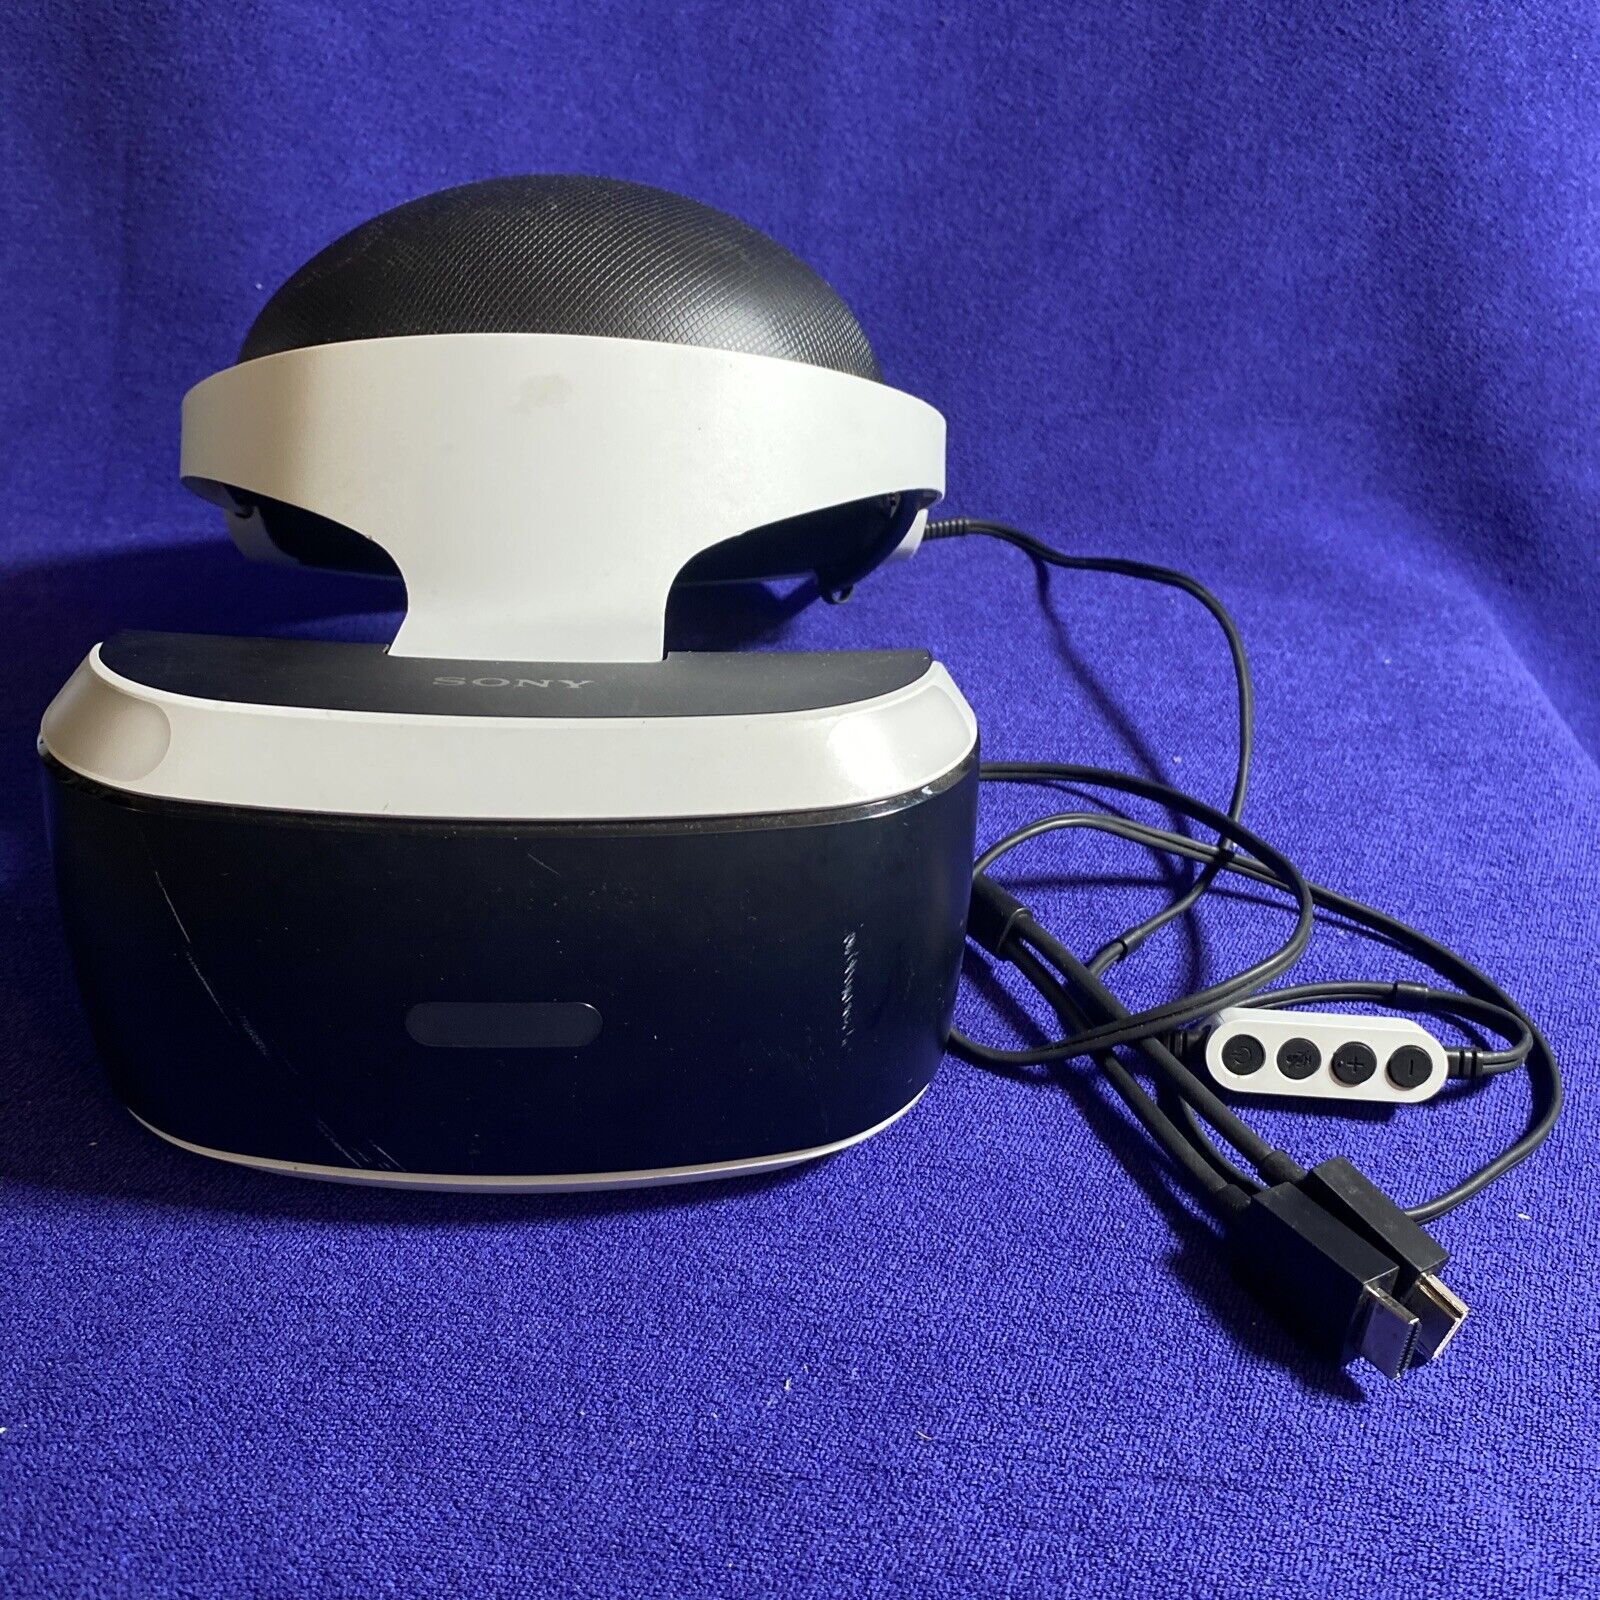 UNTESTED* Sony Playstation VR Headset PSVR PS4 CUH-ZVR1 Gen 1